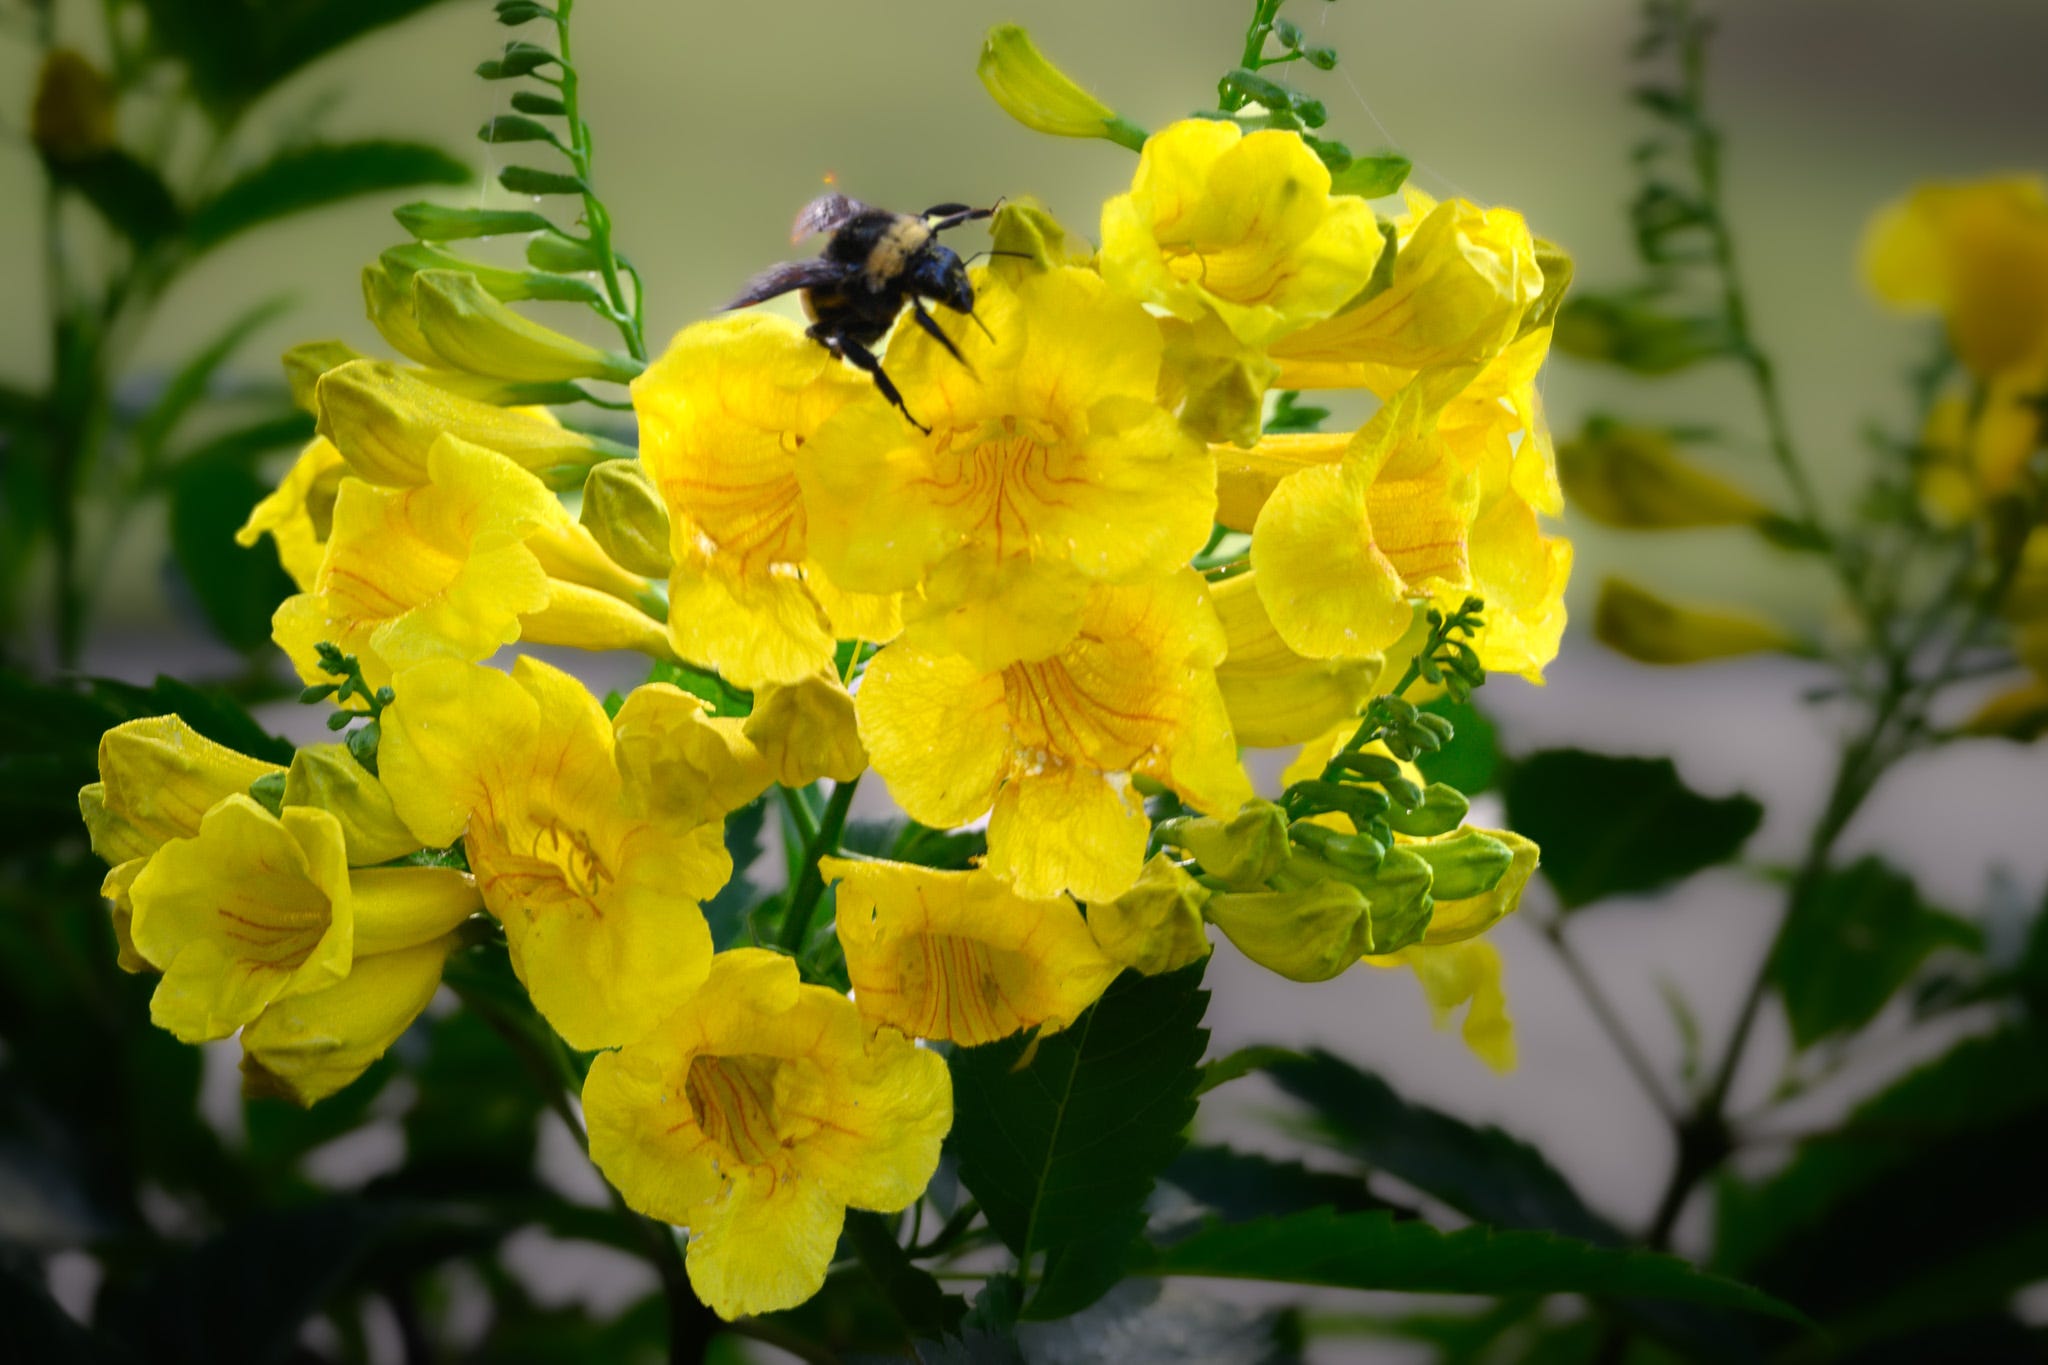 The yellow blooms of the Esperanza plant invite the black and yellow bumble bee to taste it’s nectar